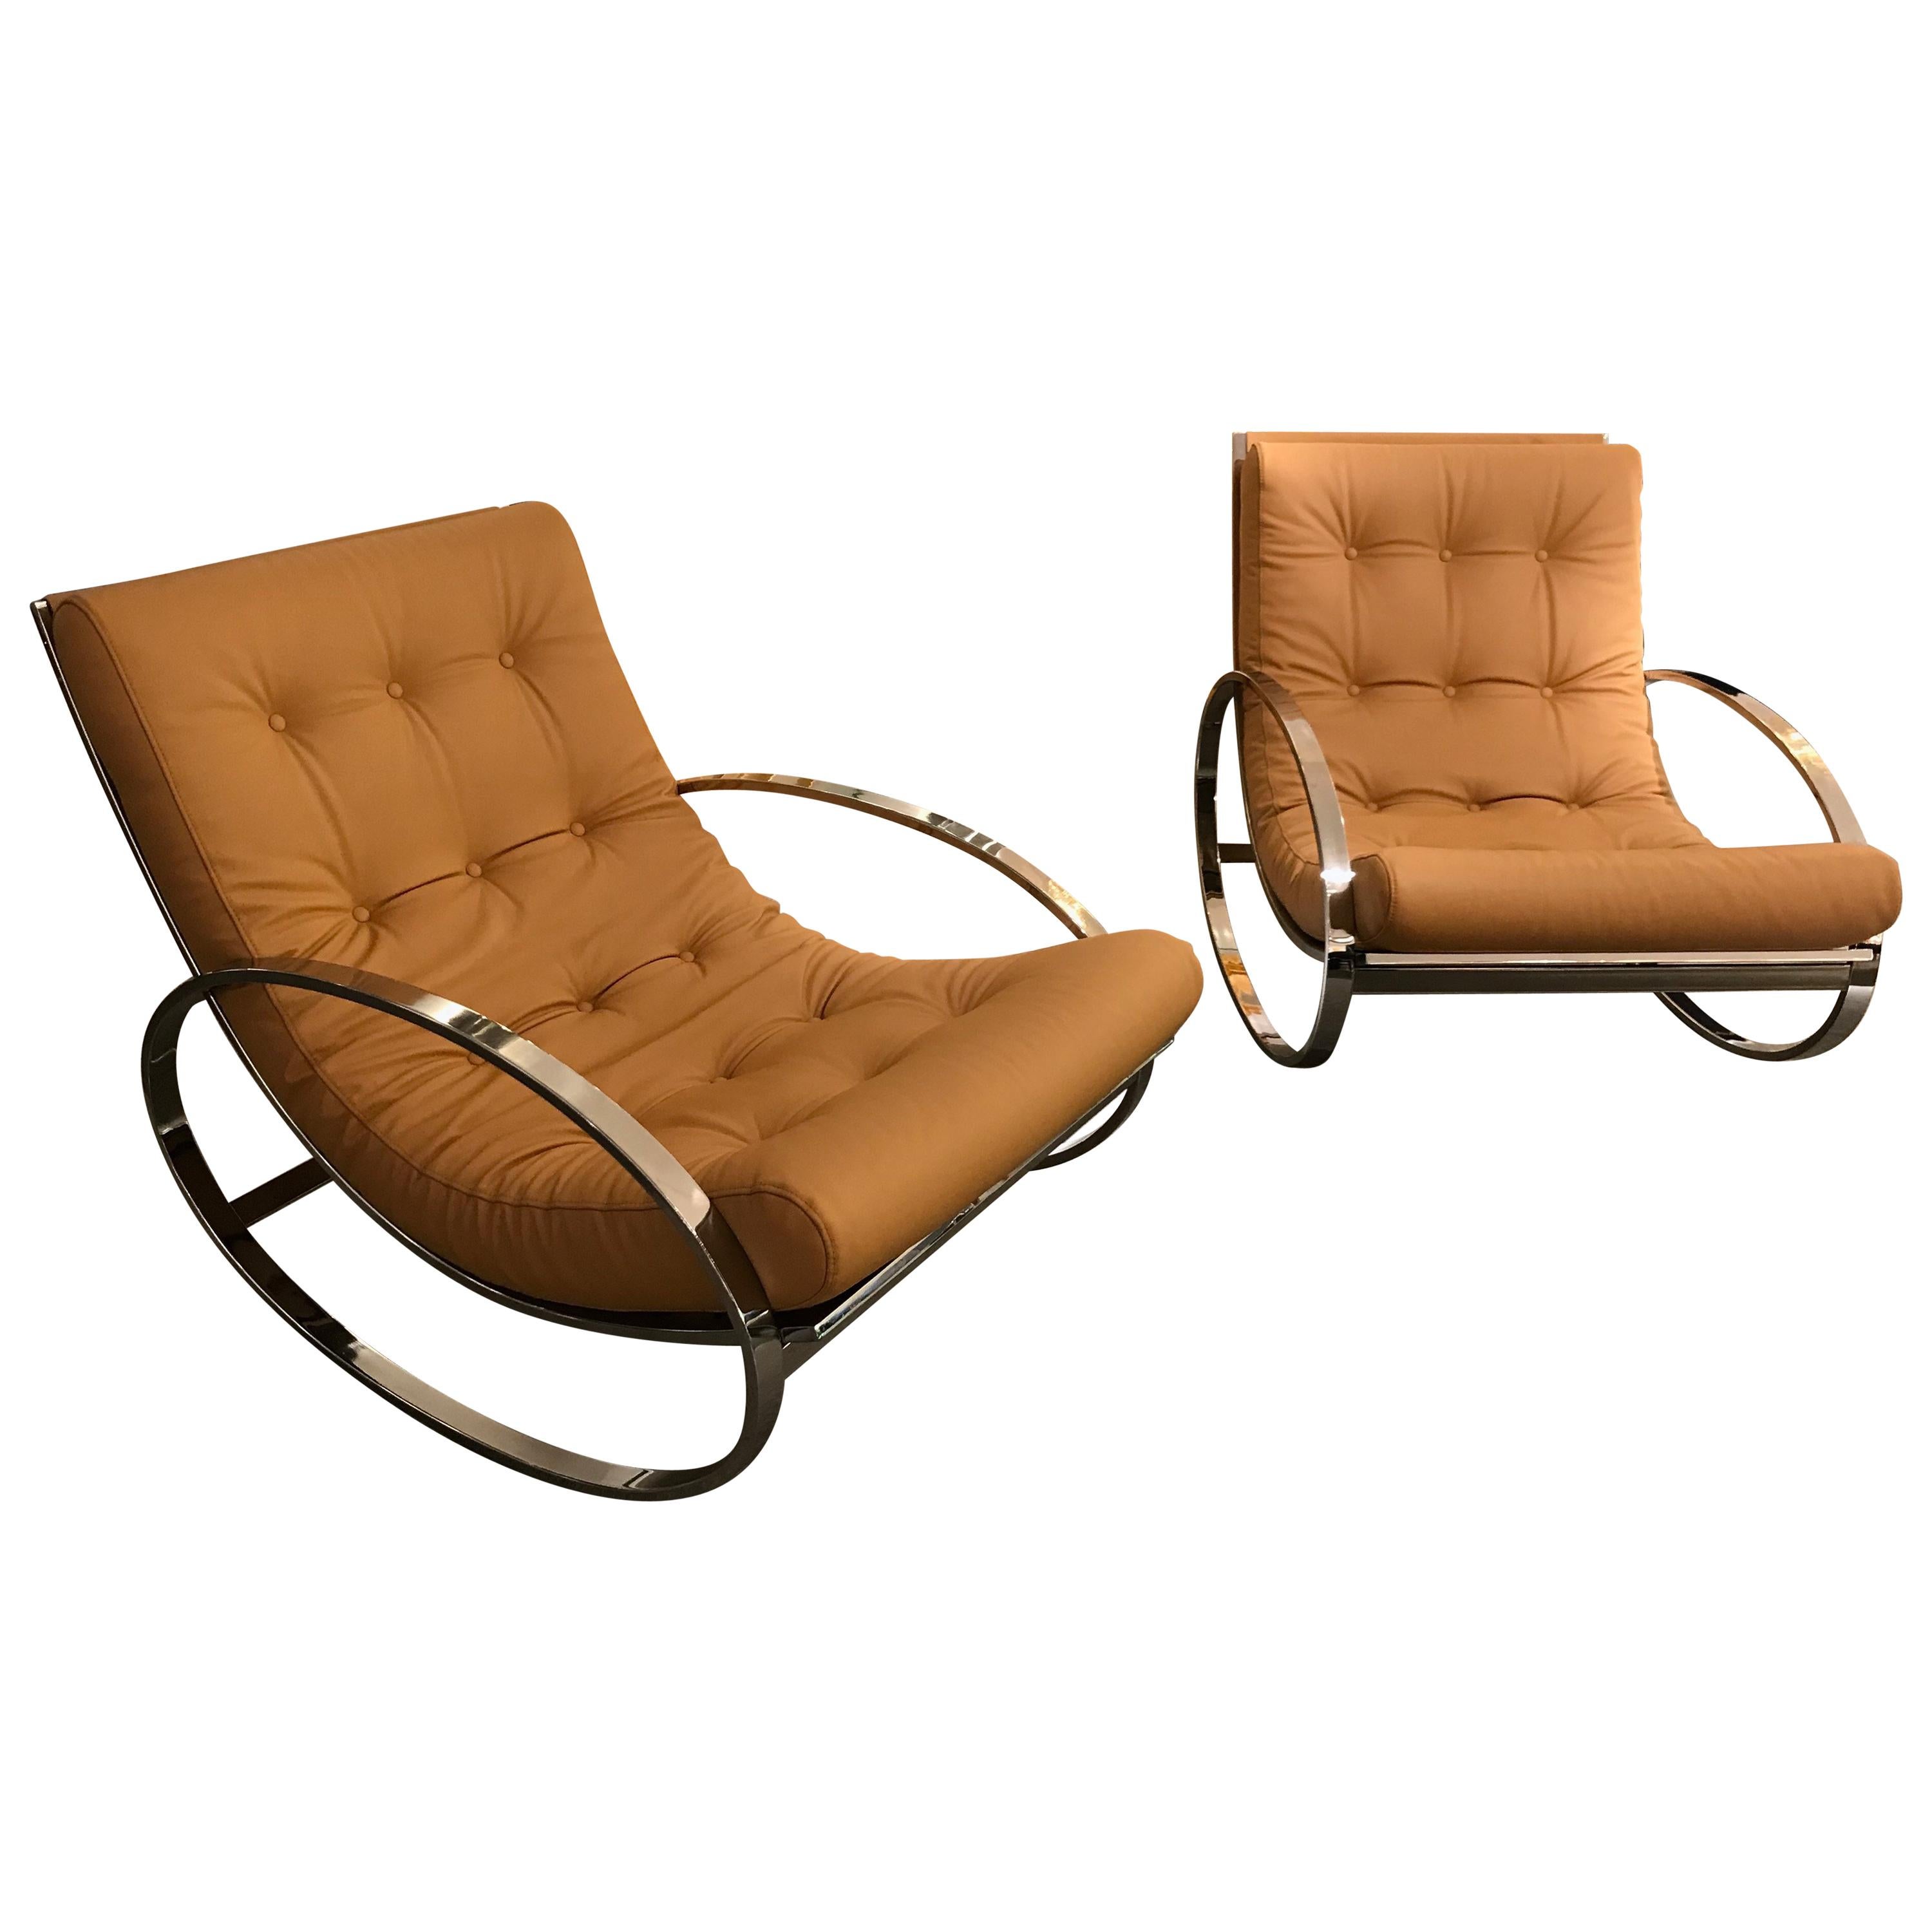 Pair of Rocking Lounge Chair Metal Leather by Renato Zevi, Italy, 1970s